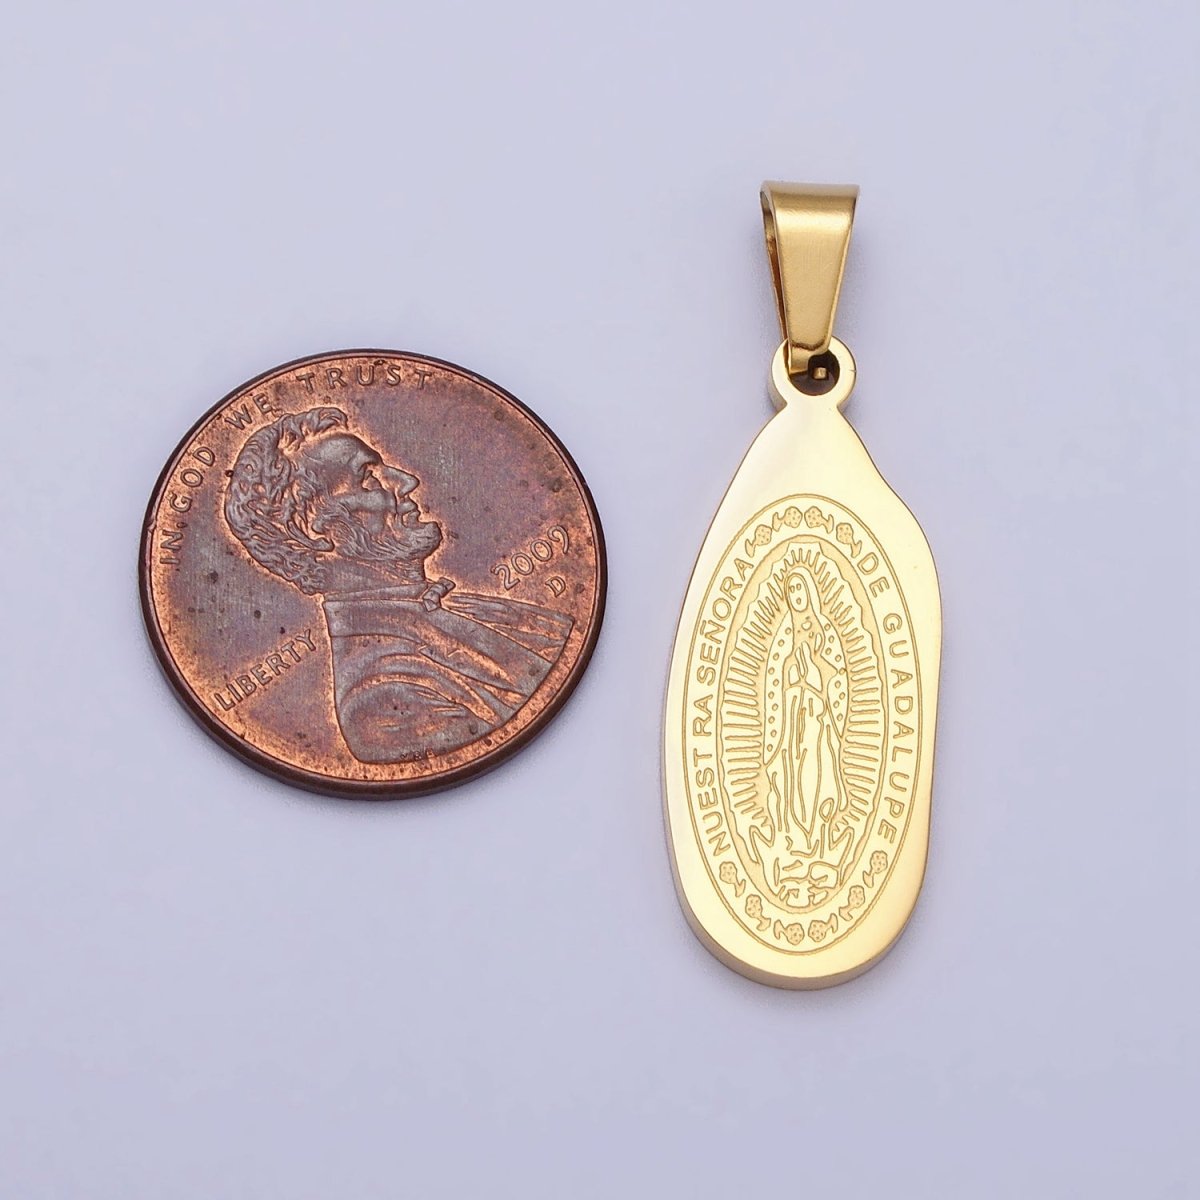 Stainless Steel Nuestra Señora De Guadalupe Engraved Abstract Oval Pendant in Gold & Silver J-613 J-618 - DLUXCA